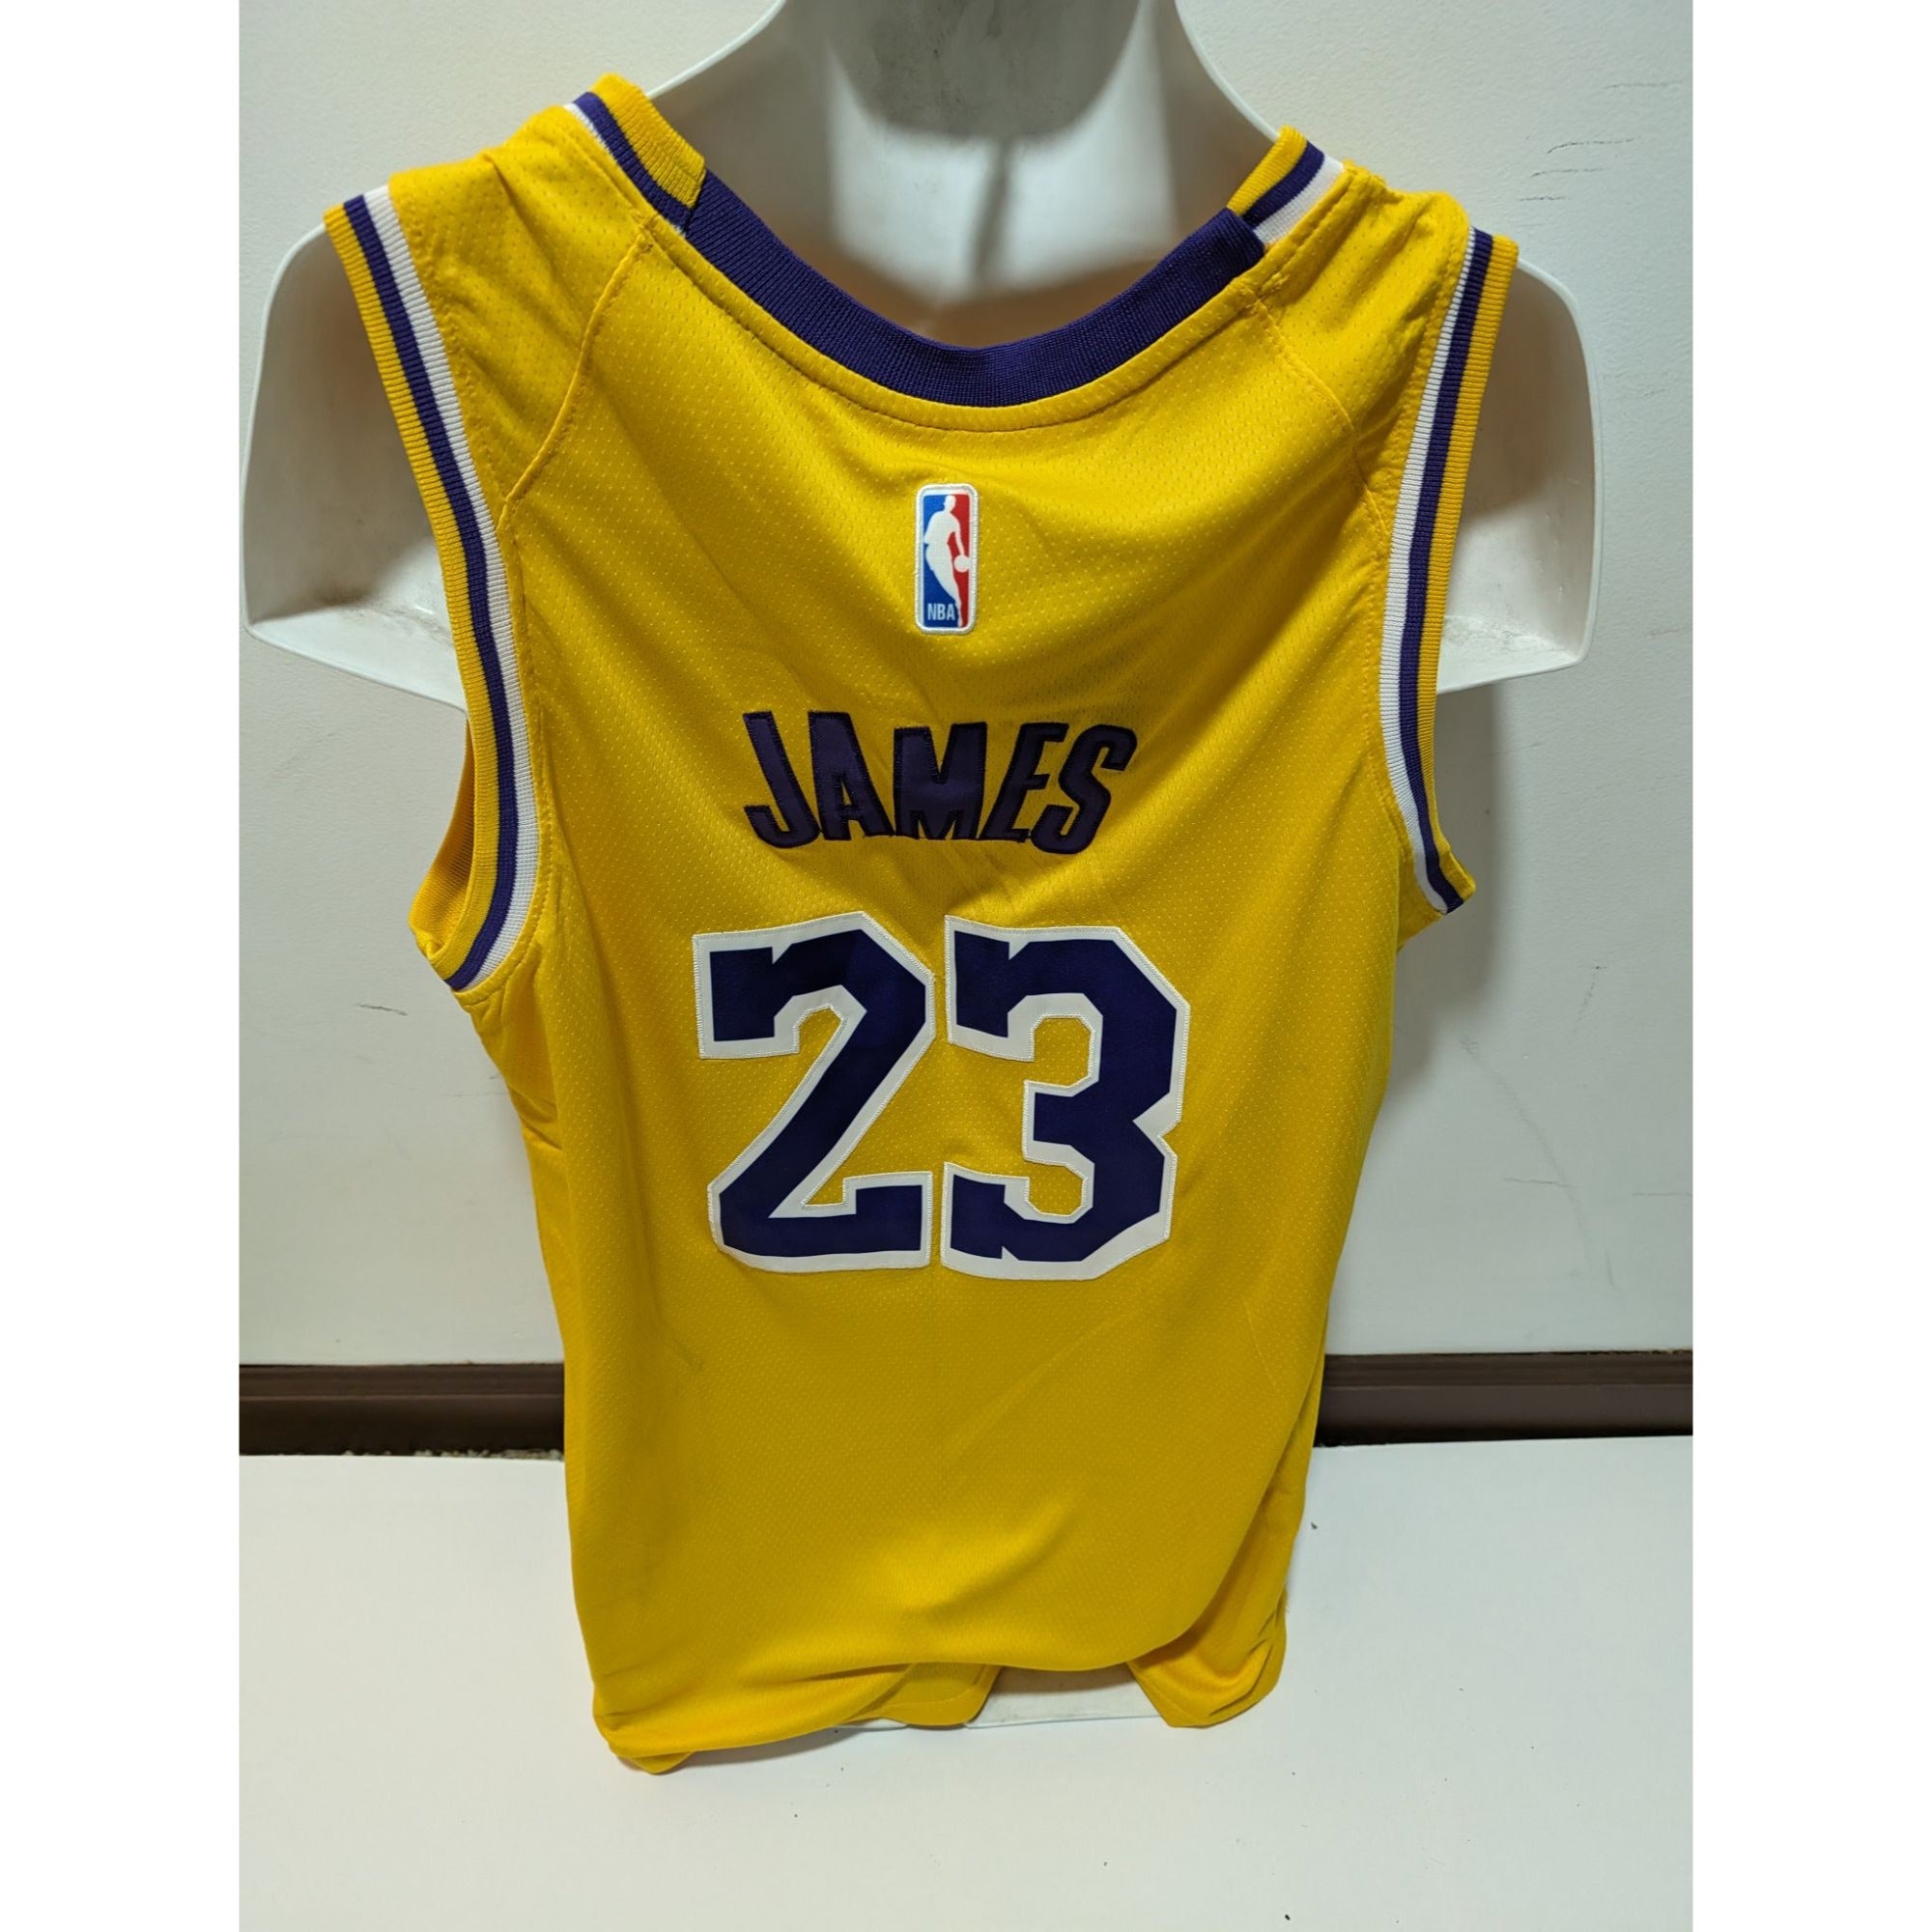 LeBron James Anthony Davis 2019-20 NBA champions Los Angeles Lakers team signed gay model Jersey signed with proof